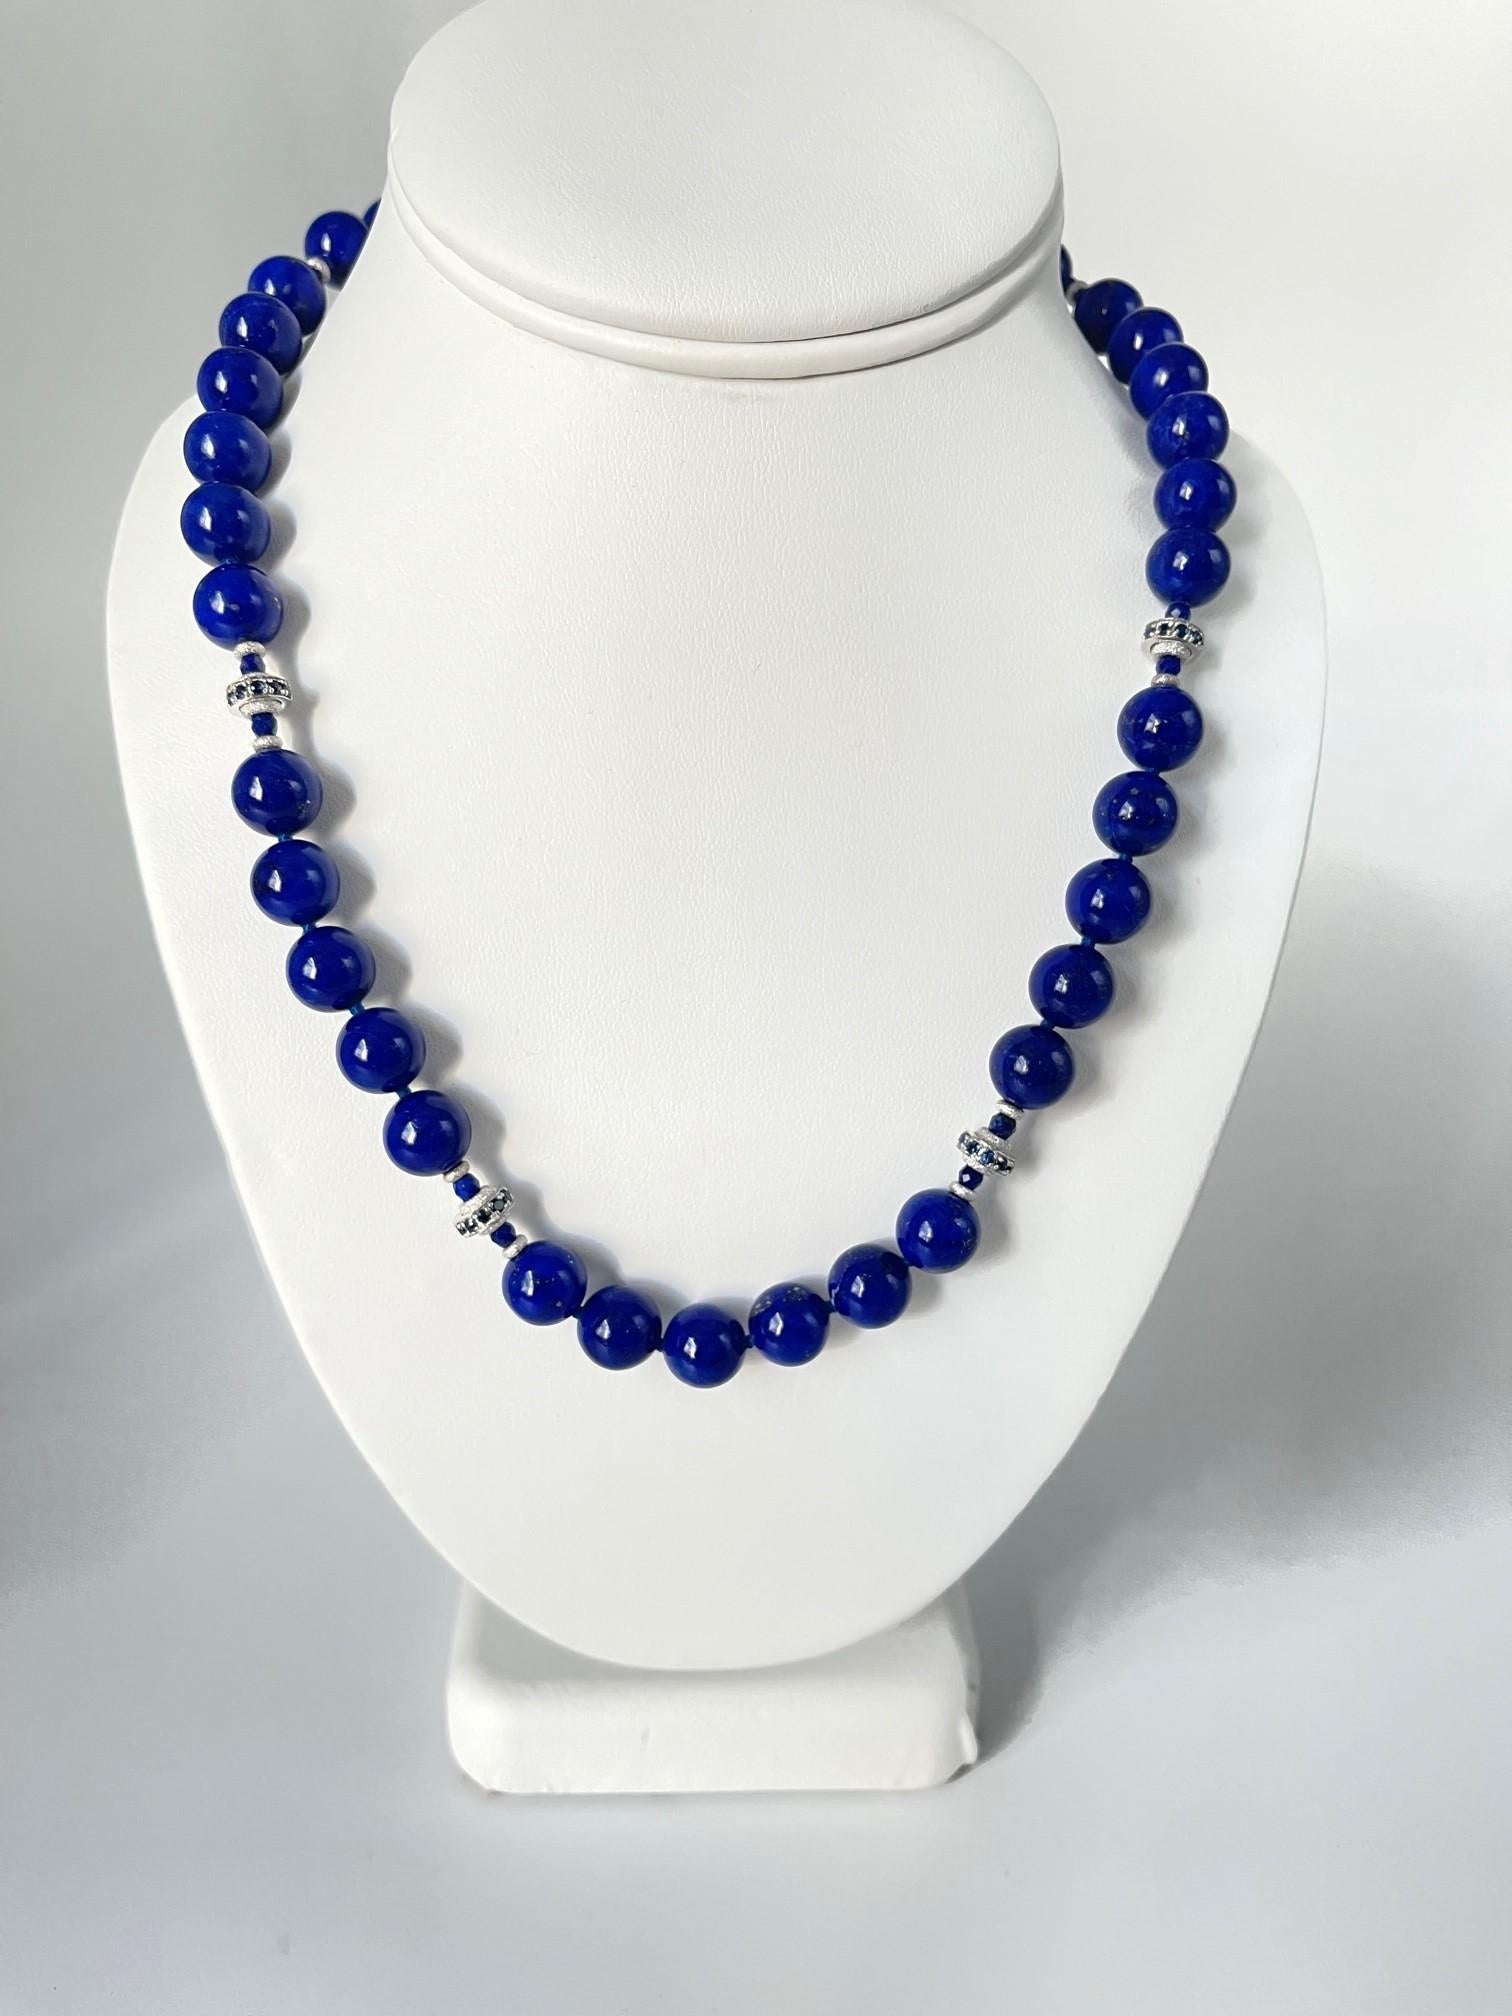 10mm Round Lapis Lazuli, Faceted Sapphire Bead & White Gold Necklace, 19 Inches For Sale 1